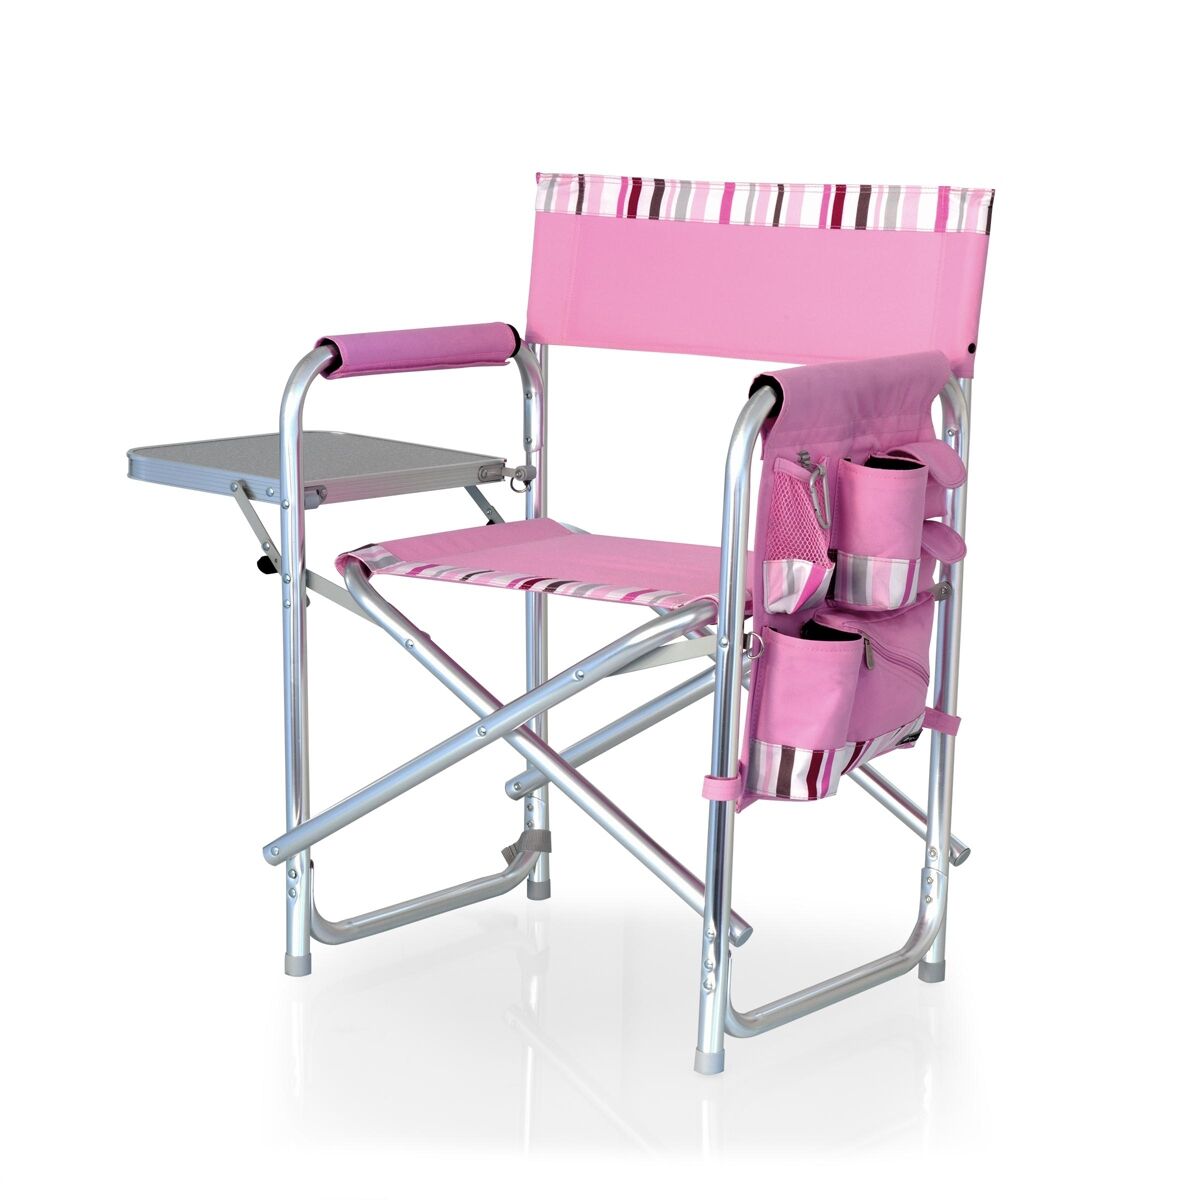 Oniva by Picnic Time Pink Portable Folding Sports Chair - Pink